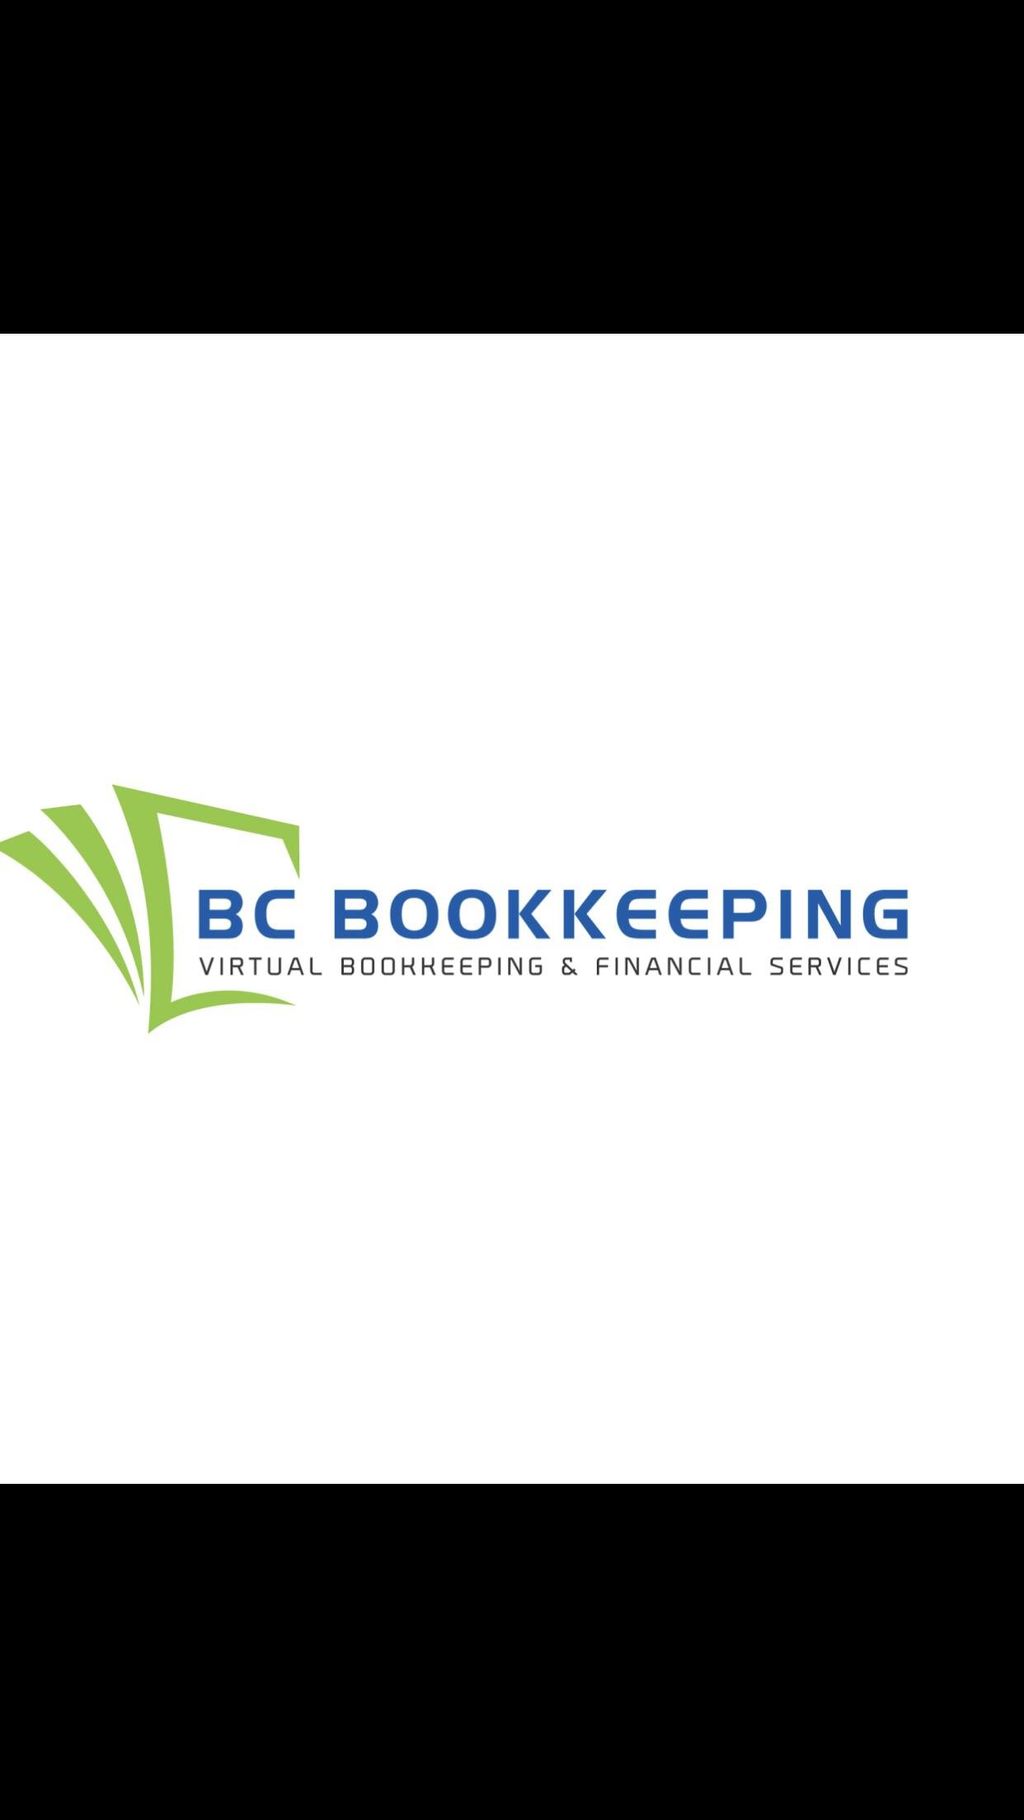 BC Bookkeeping